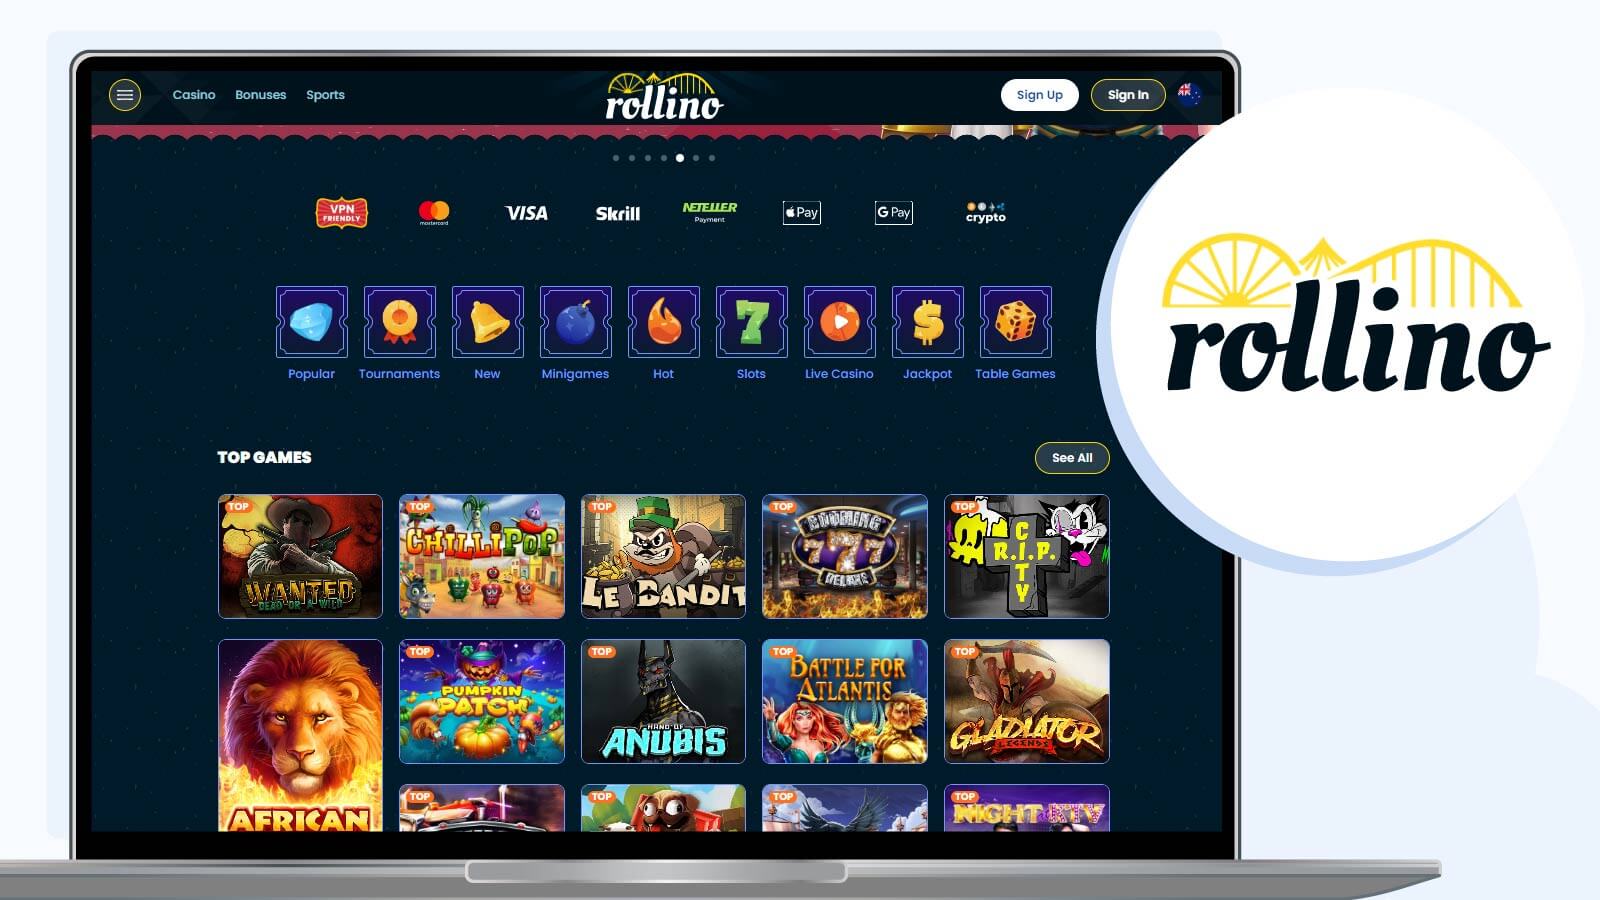 Best 20 Free Spins No Deposit on Sign-Up at Rollino Casino